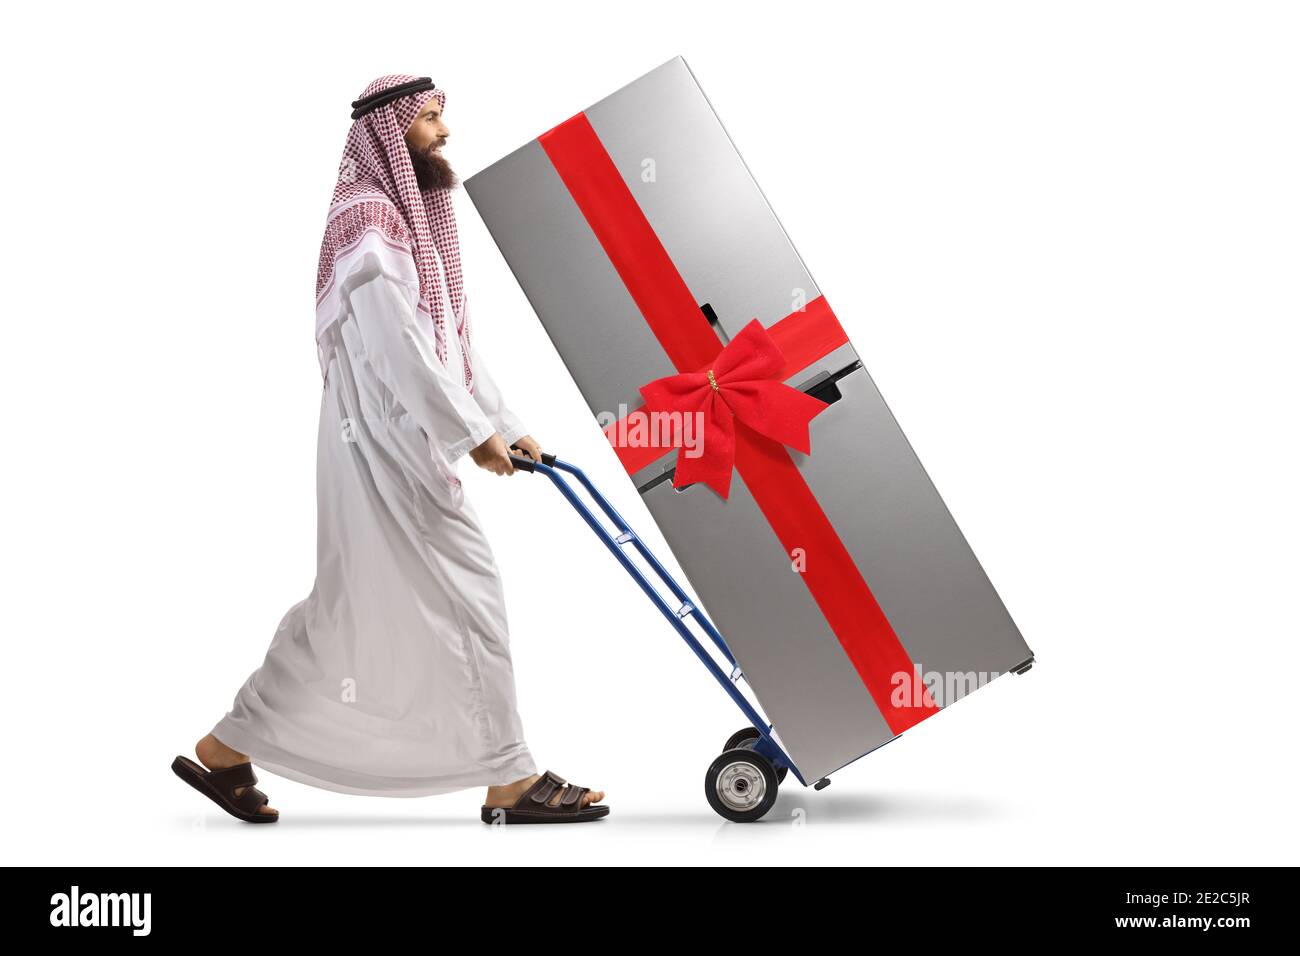 Full length profile shot of a saudi arab man pushing a fridge with a red bow on a hand-truck isolated on white background Stock Photo